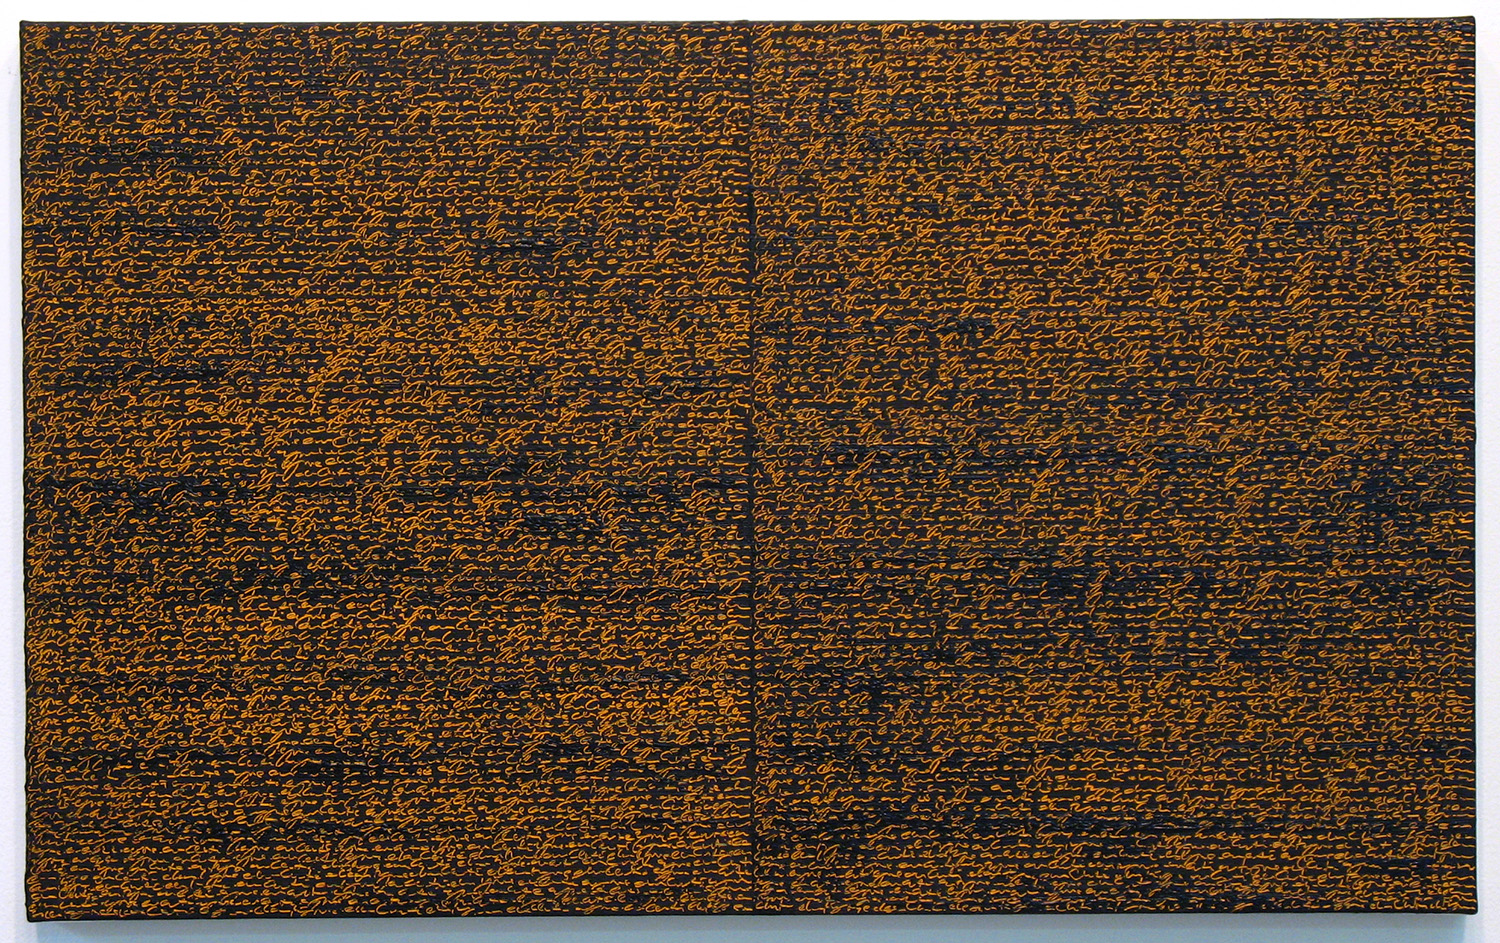 Open Book -orange-brown-<br>oil and amber on canvas over panel, 37 x 60 cm, 2008